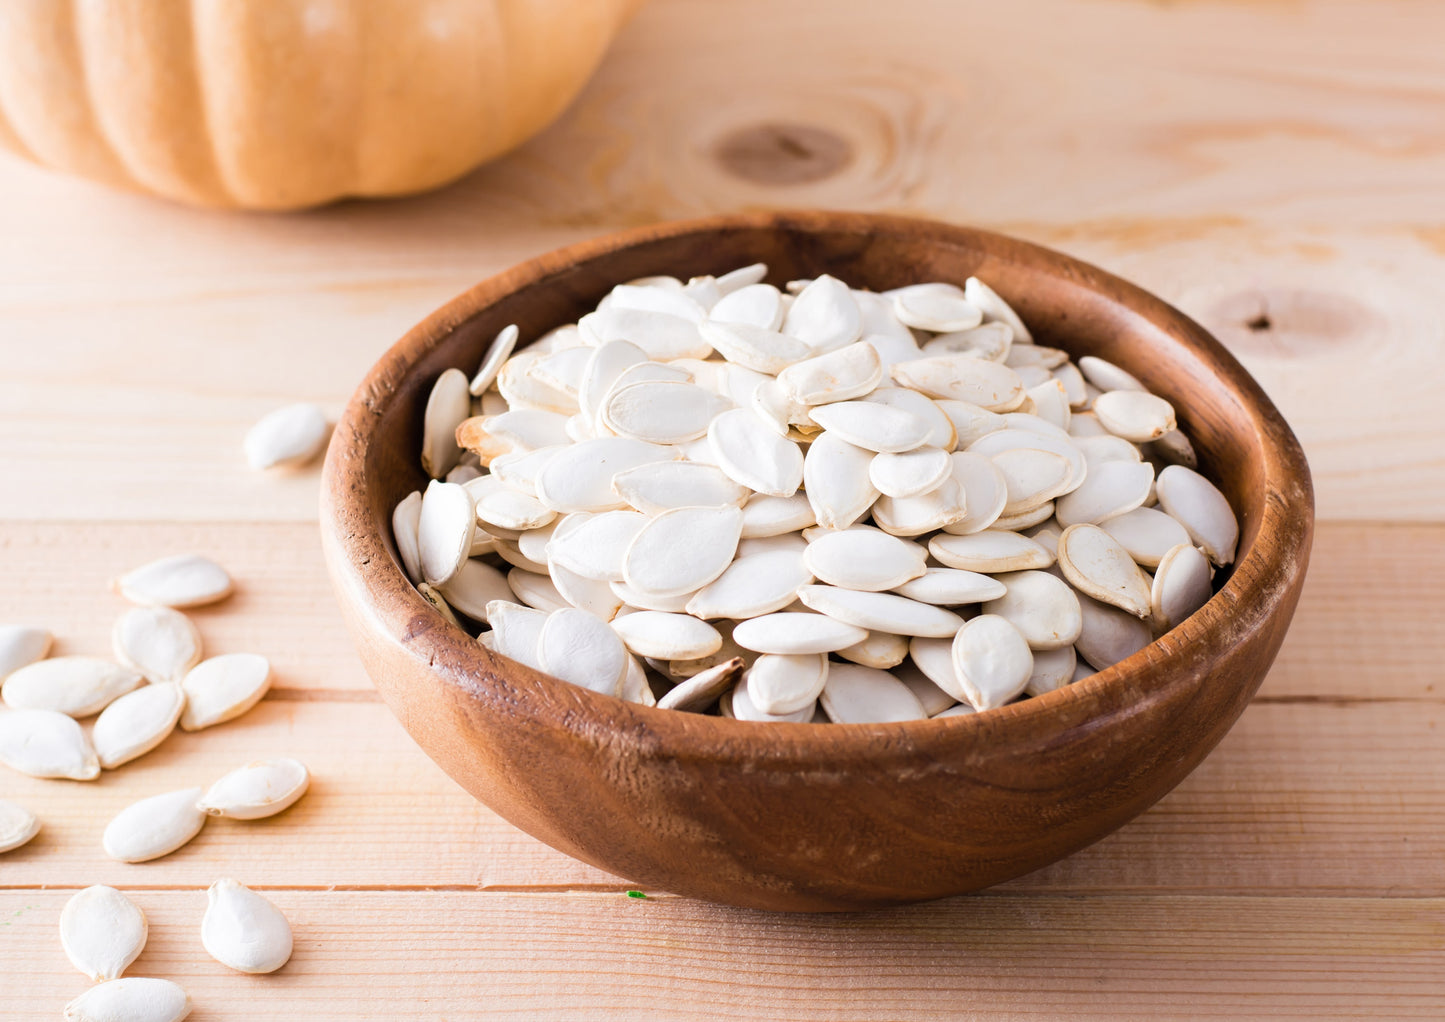 Organic Raw Pumpkin Seeds in Shell – Non-GMO, Dried, Unsalted, Unroasted, Vegan, Bulk. Good Source of Protein, Fiber, Omega Fats. Great for Roasting with Homemade Seasonings